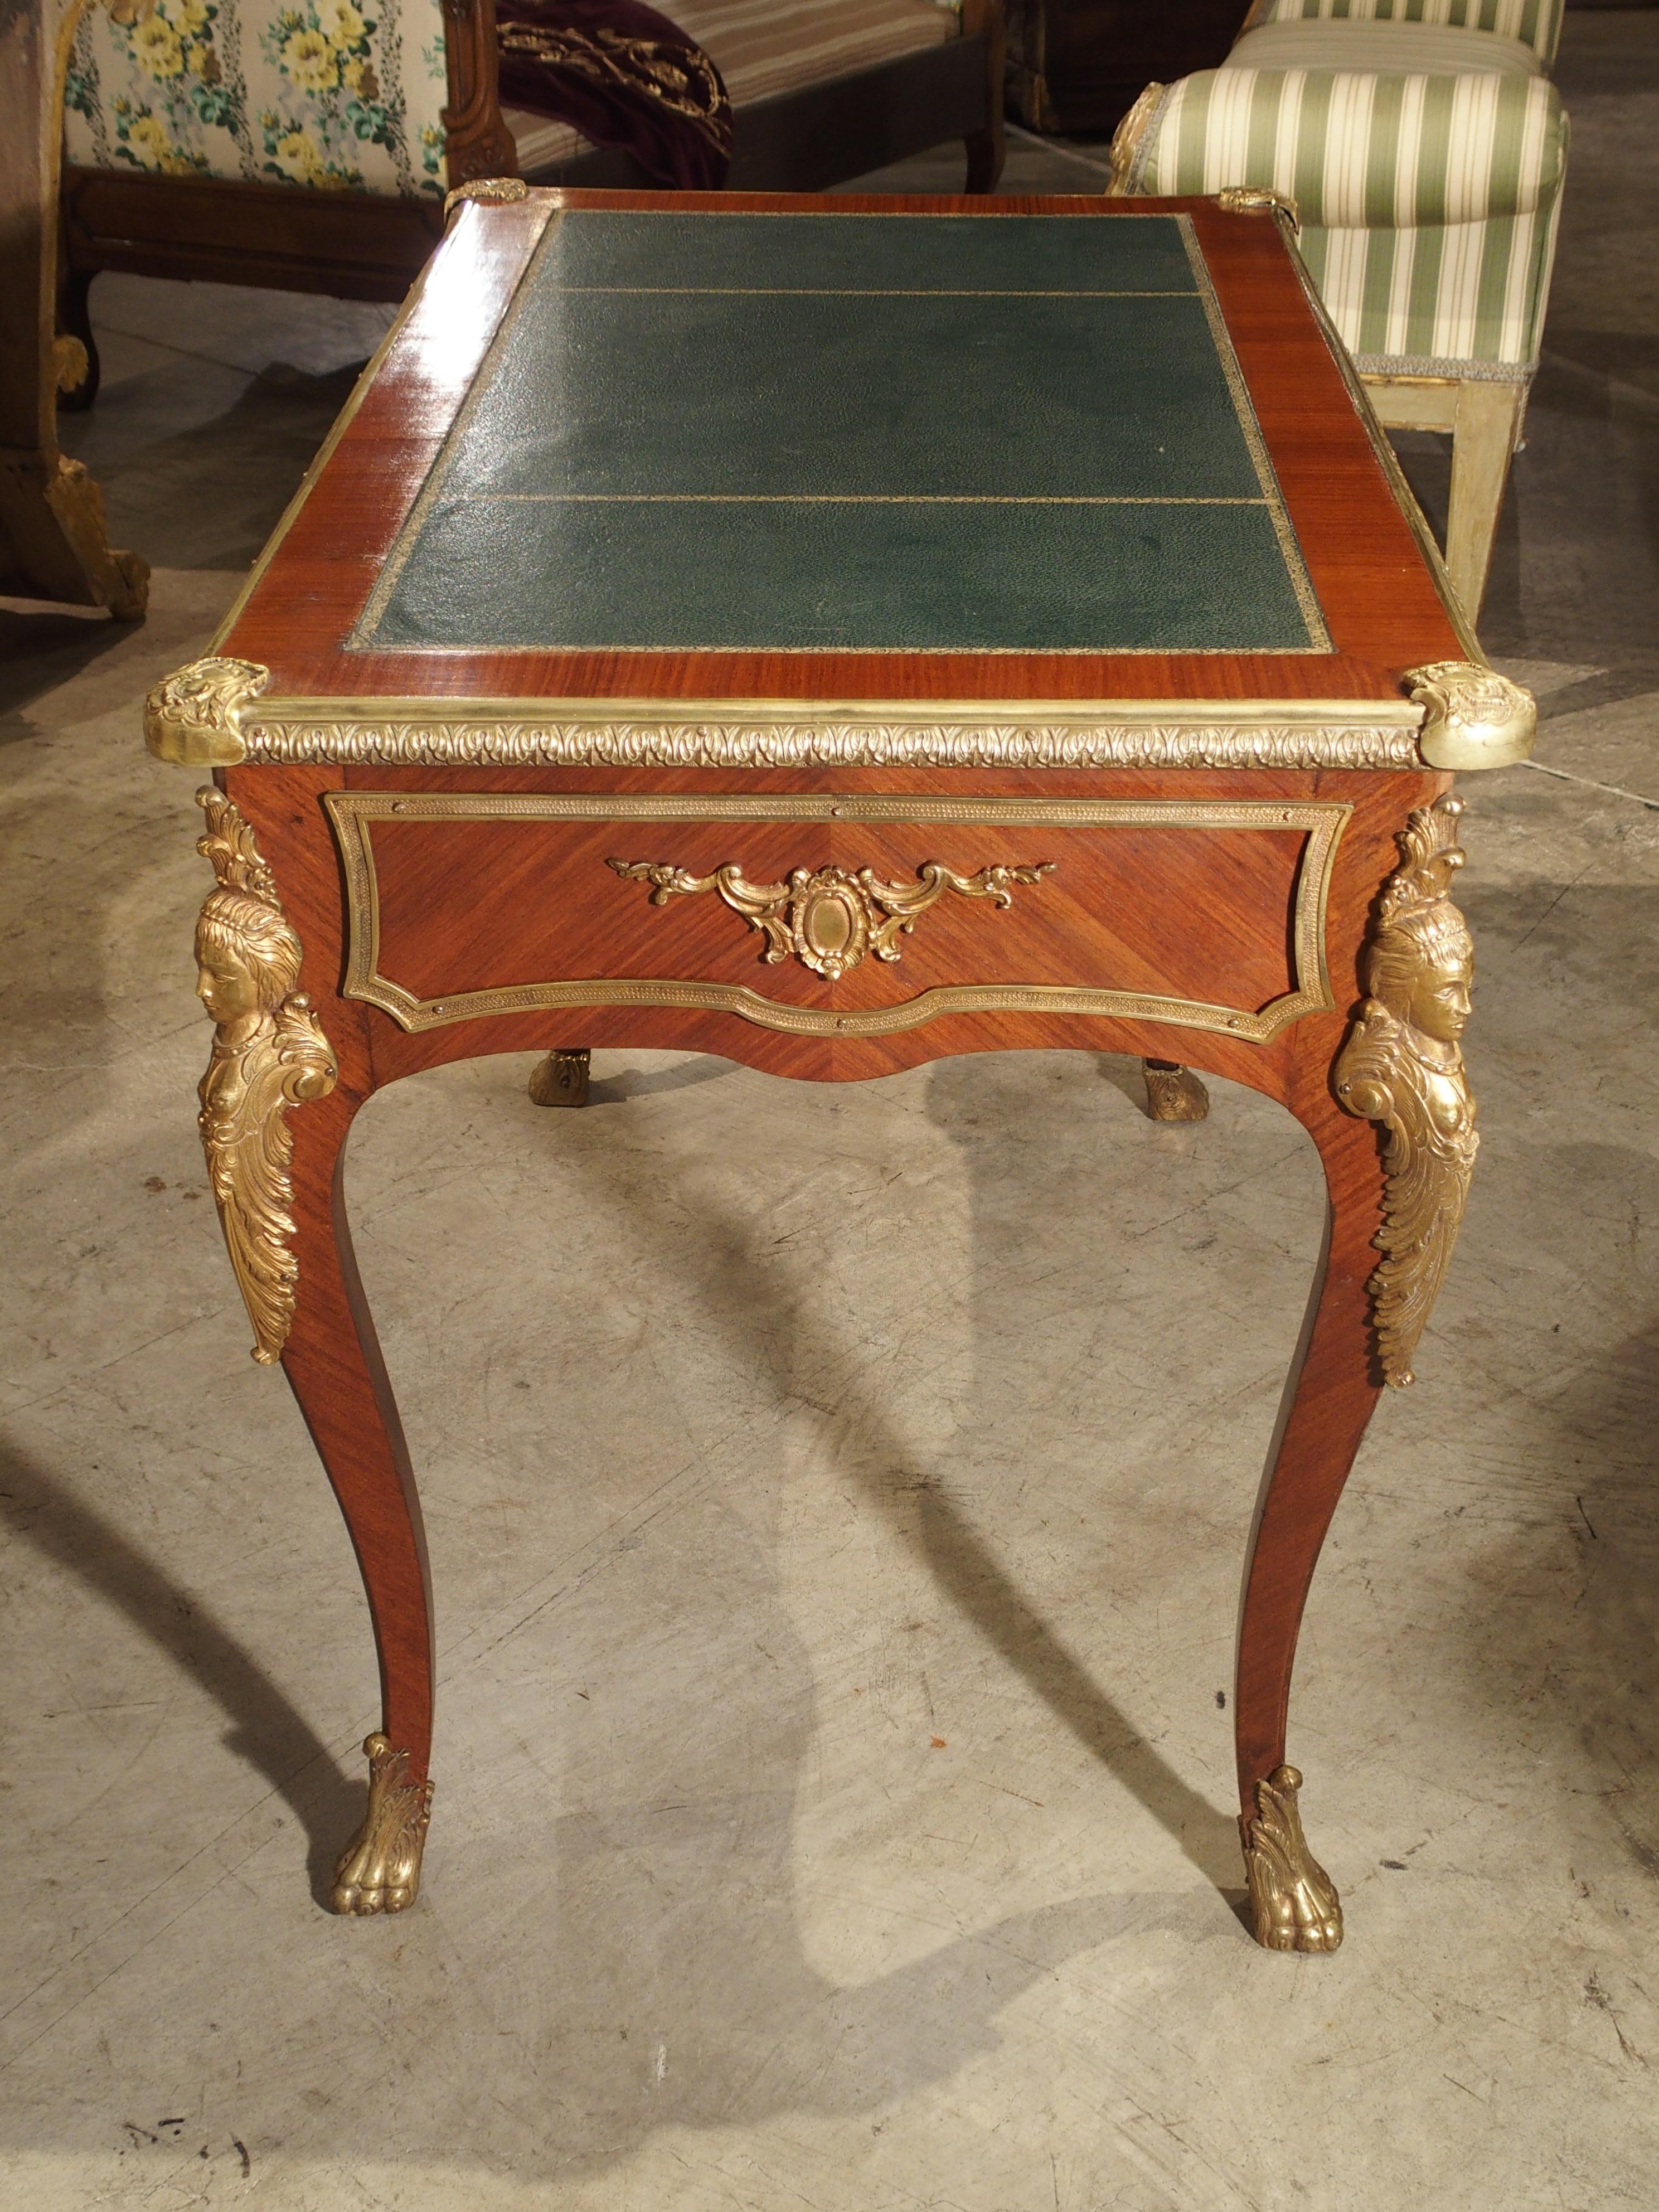 This Louis XV style Bureau plat writing desk from France will be perfect in any room. It has veneered exotic wood, elegant bronze mounts and a gilt embossed leather top. There is a single drawer running the length of the leather top on one side,